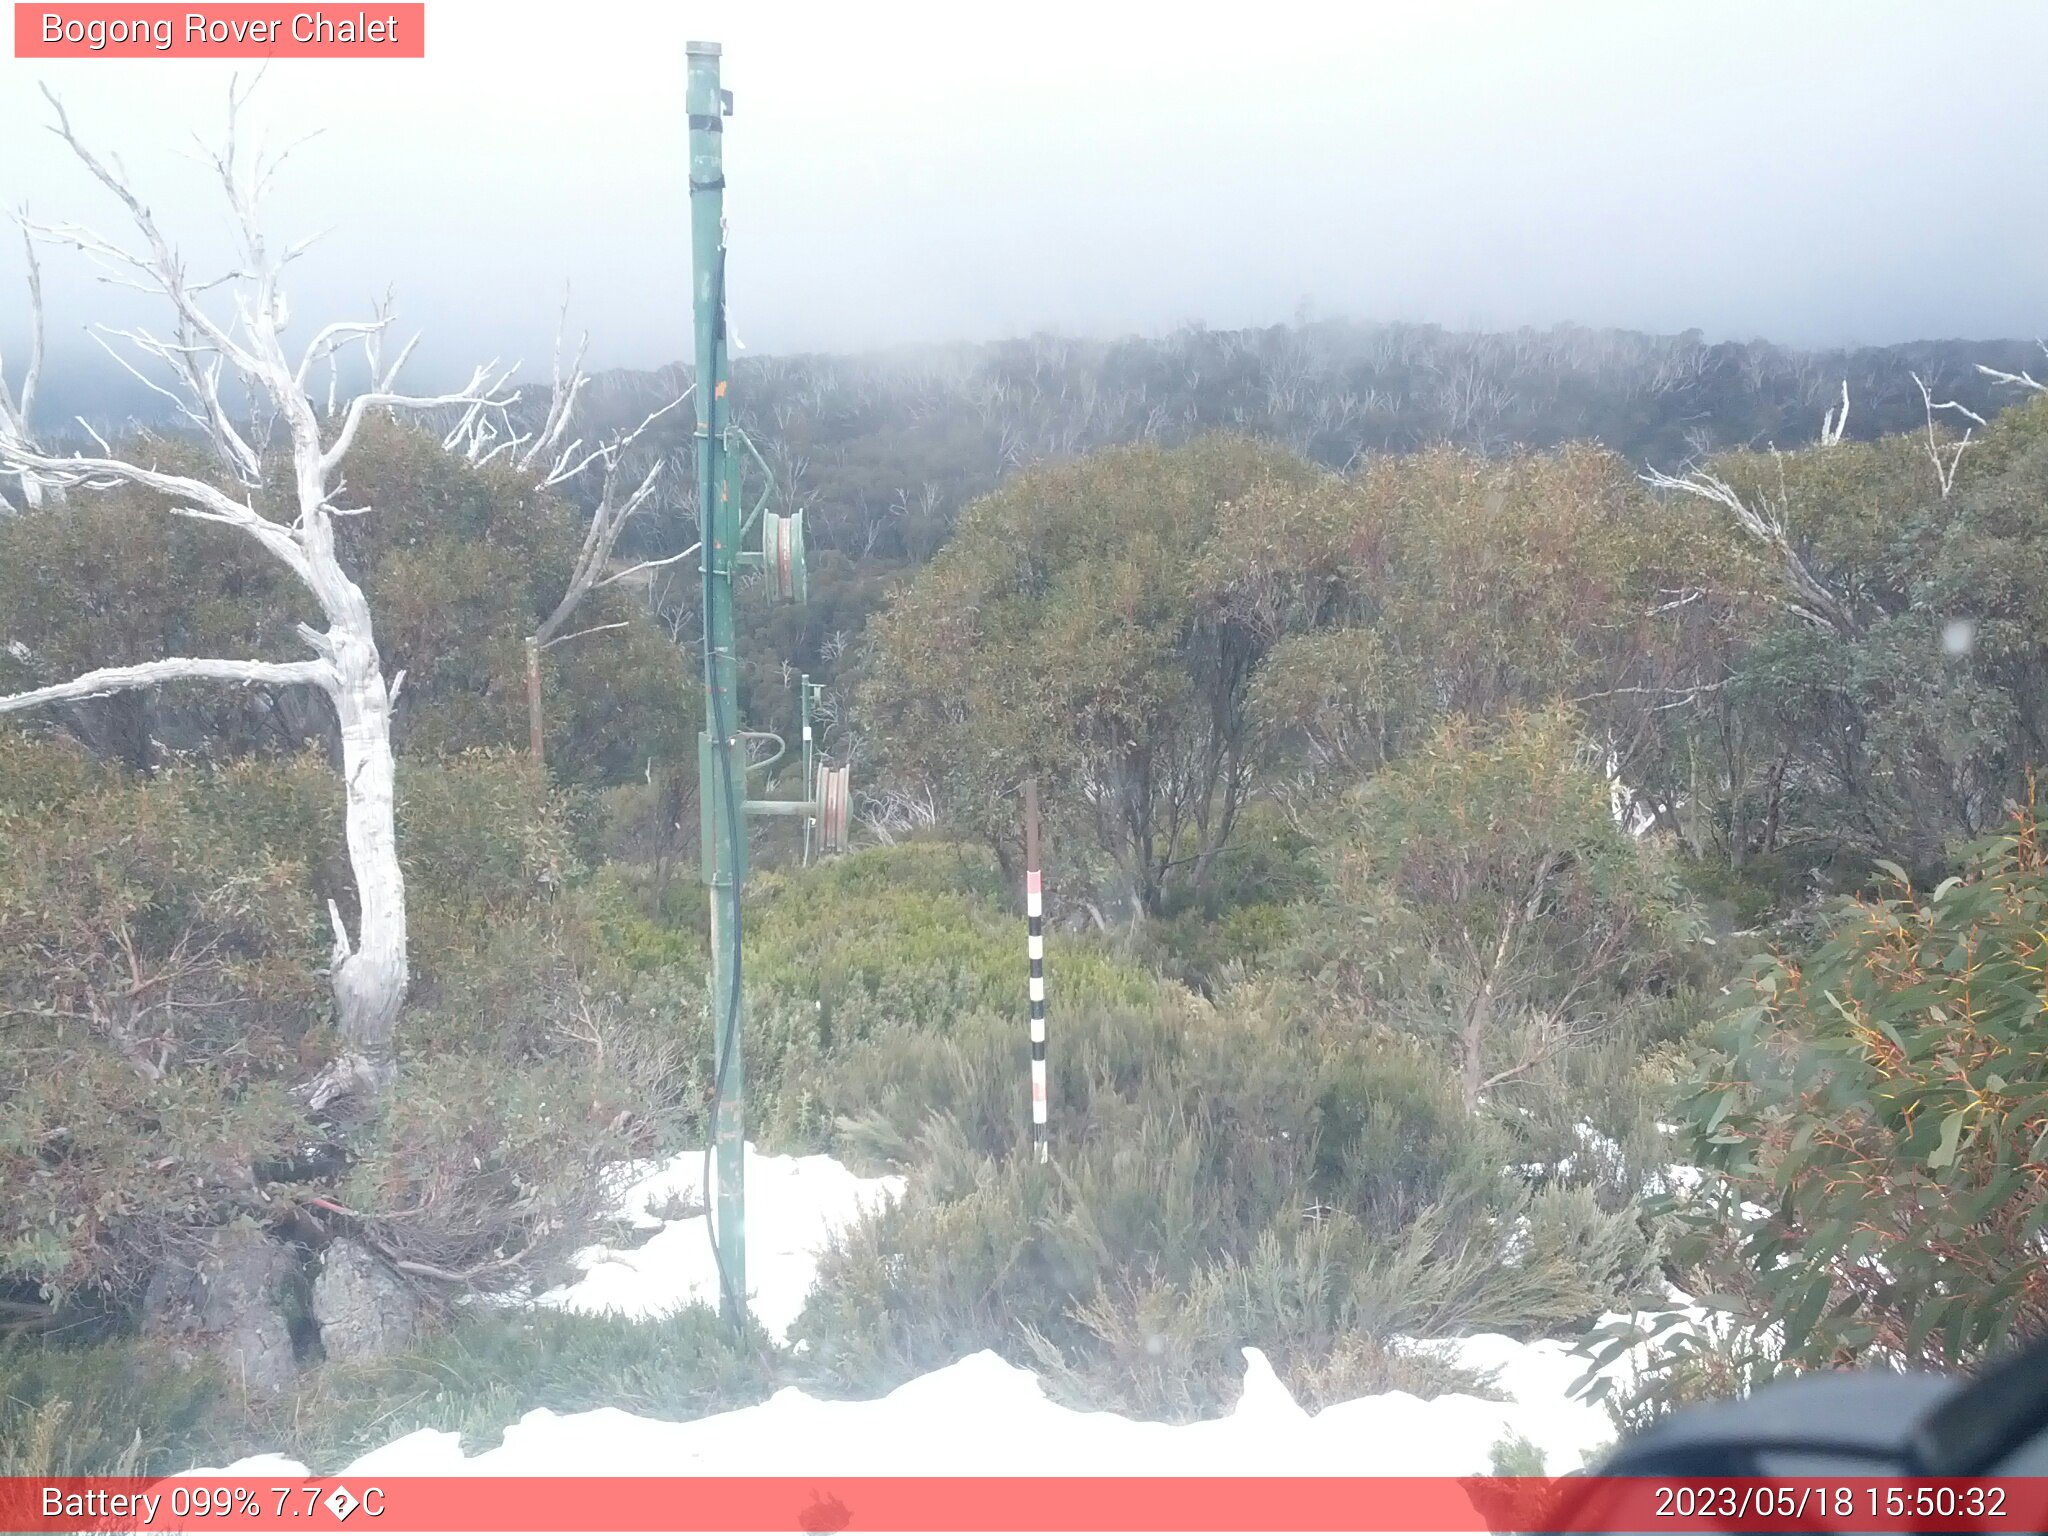 Bogong Web Cam 3:50pm Thursday 18th of May 2023